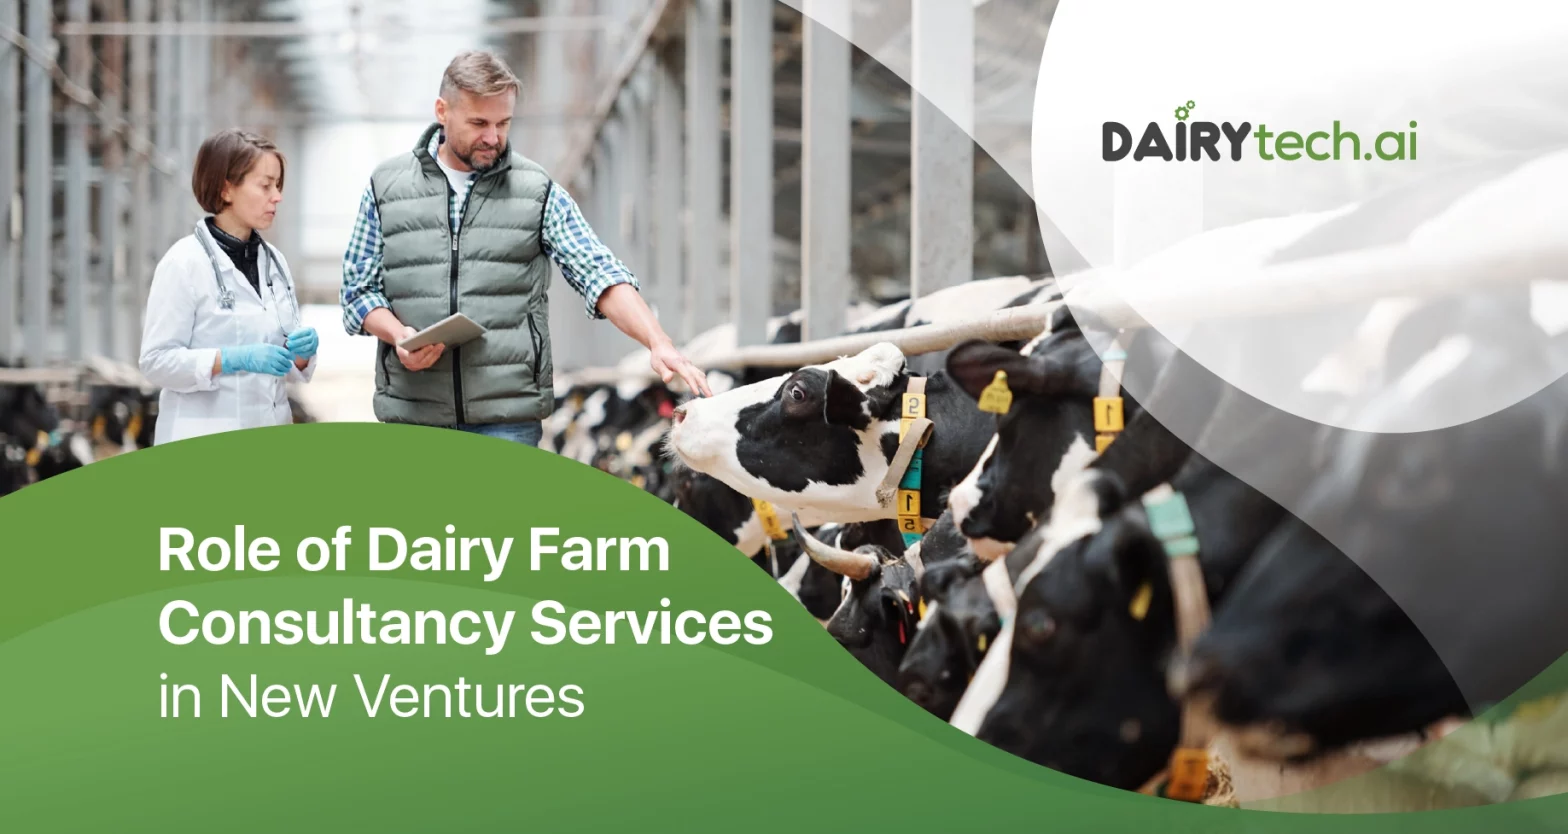 dairytechai-founded-by-ravi-garg-website-insights-role-of-dairy-farm-consultancy-services-in-new-ventures